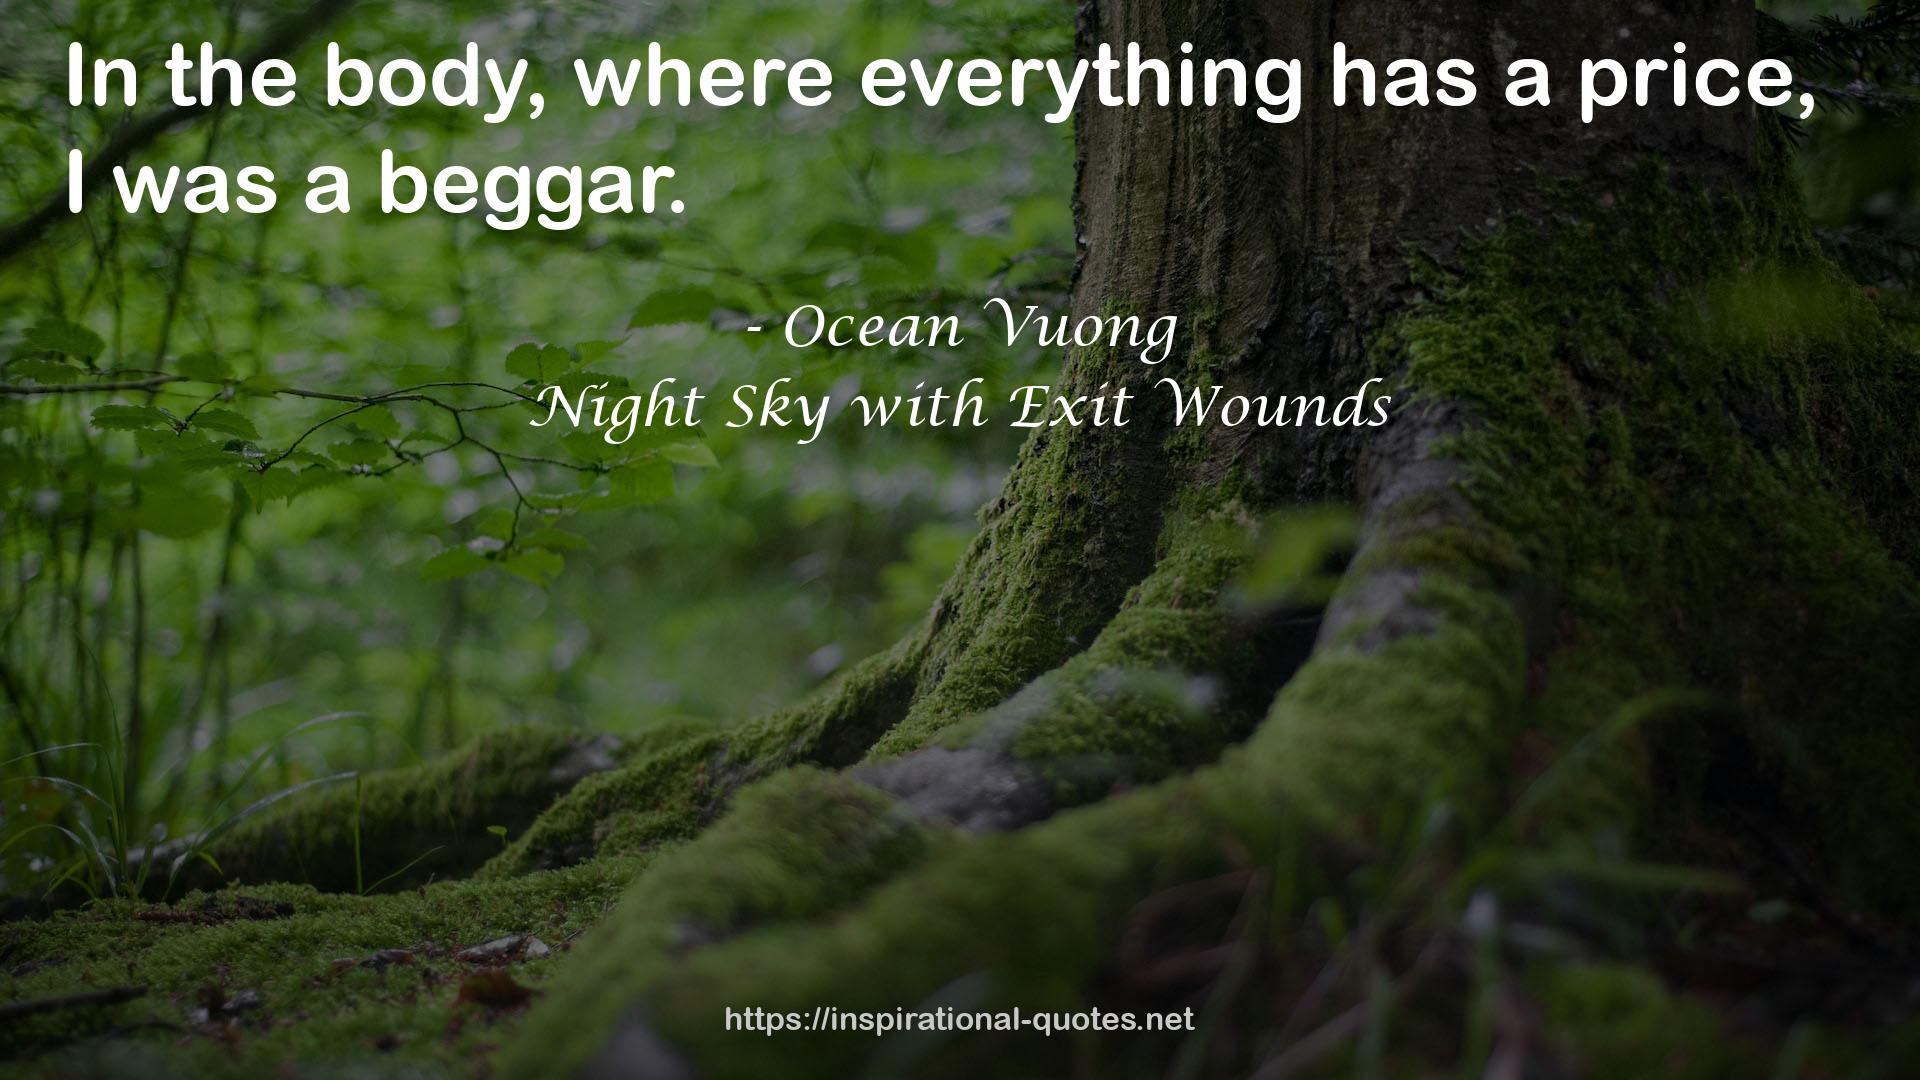 Night Sky with Exit Wounds QUOTES